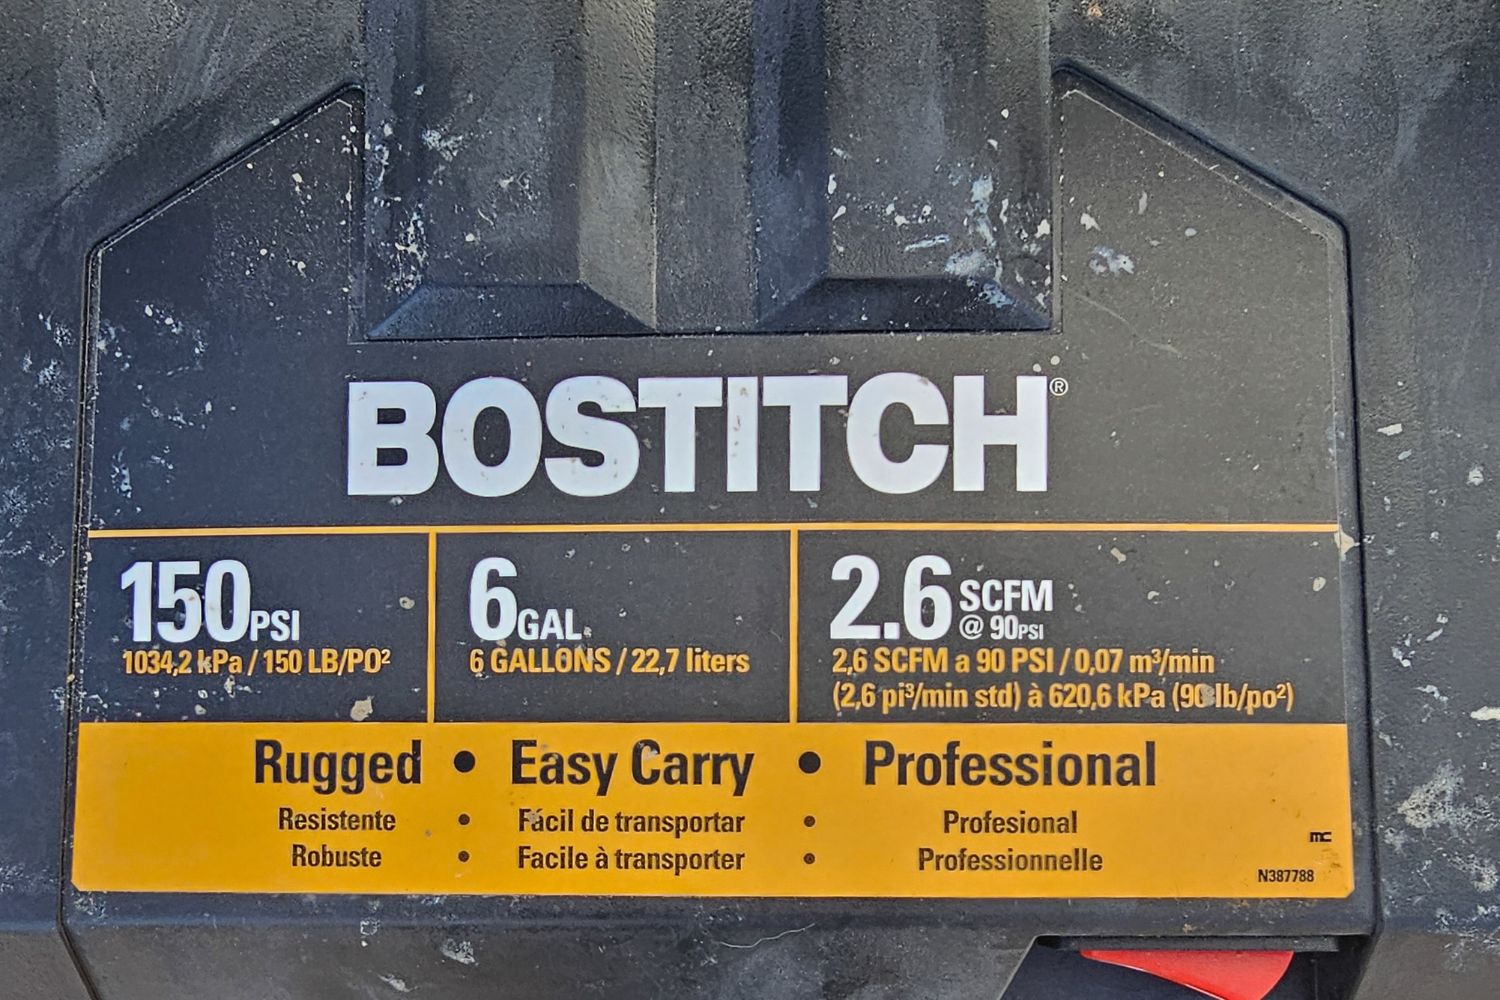 The specs label on the Bostitch pancake air compressor.